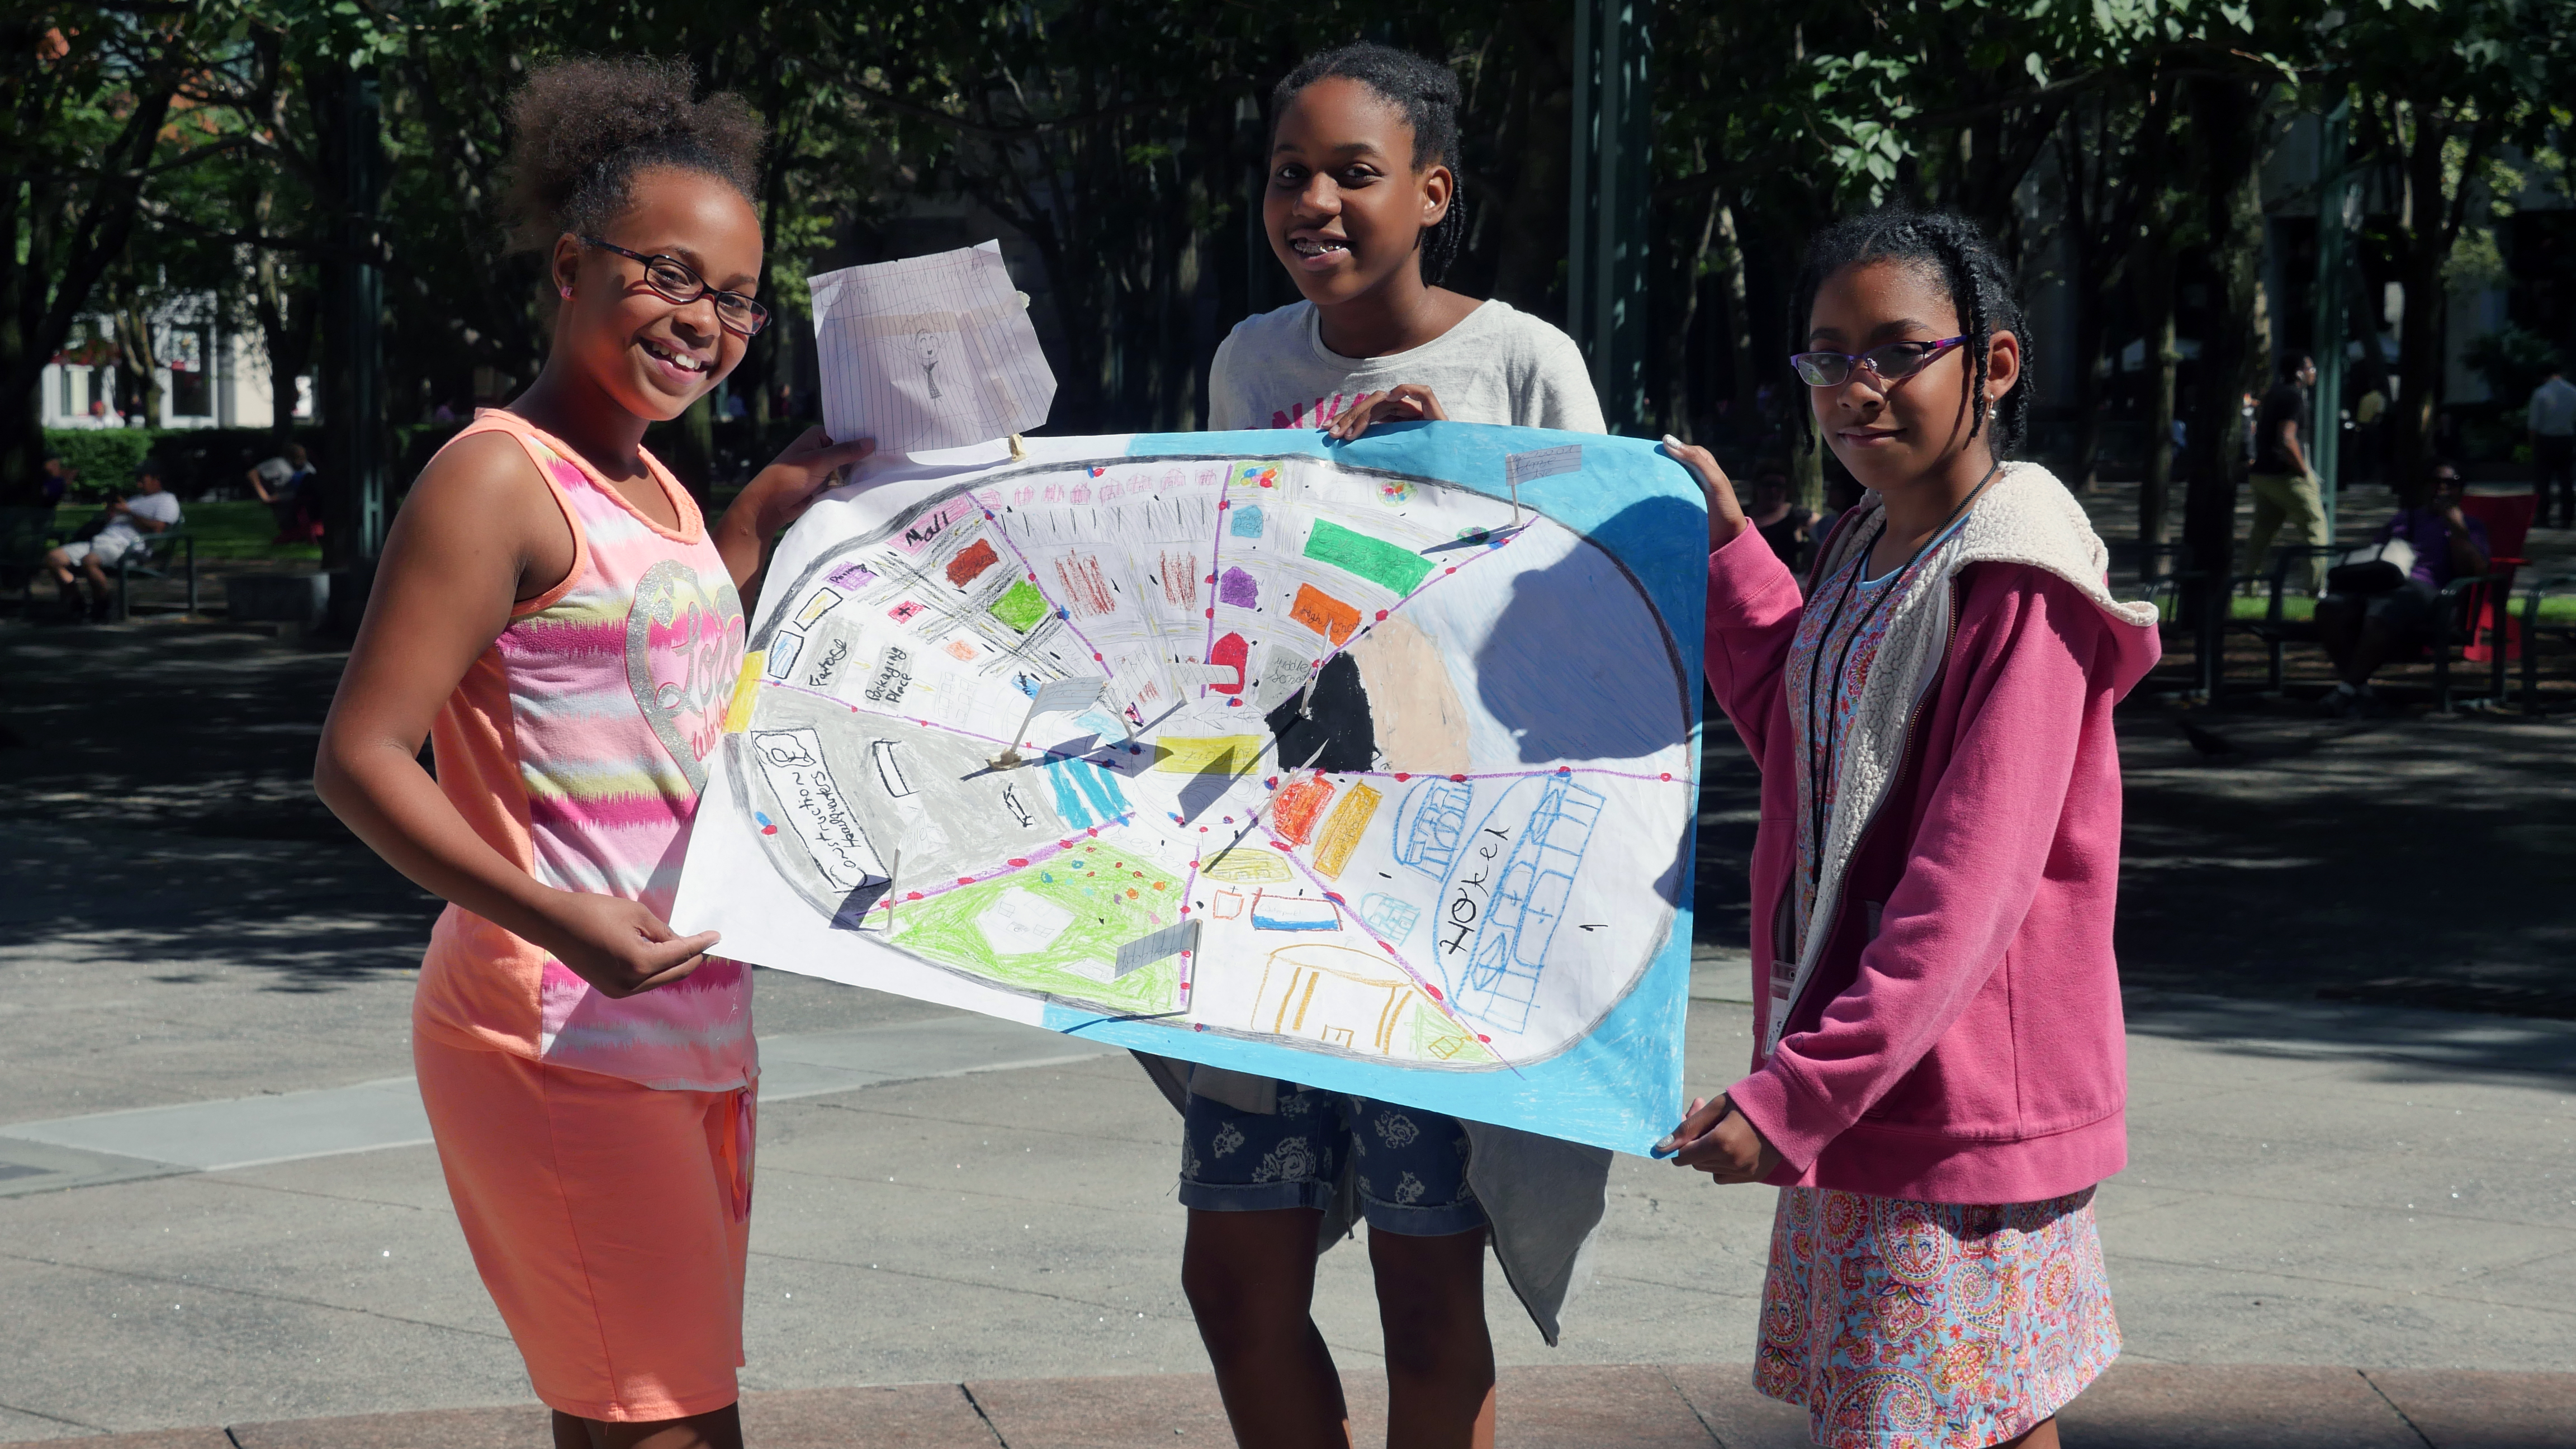 “The reason I included hydro dams and solar power inside of my smart city was because I wanted to use less pollution.” - Isabel (left) “We created these smart cities to show how we can create good transportation routes and improve our cities. We created a way for homes to be more advanced, use solar panels and stuff like that.” - Candice (center) “Transportation... I modelled that in my smart city presentation by adding trains and busses and cars, because people need to get from one place to another, quicker.” - Jaila (right)